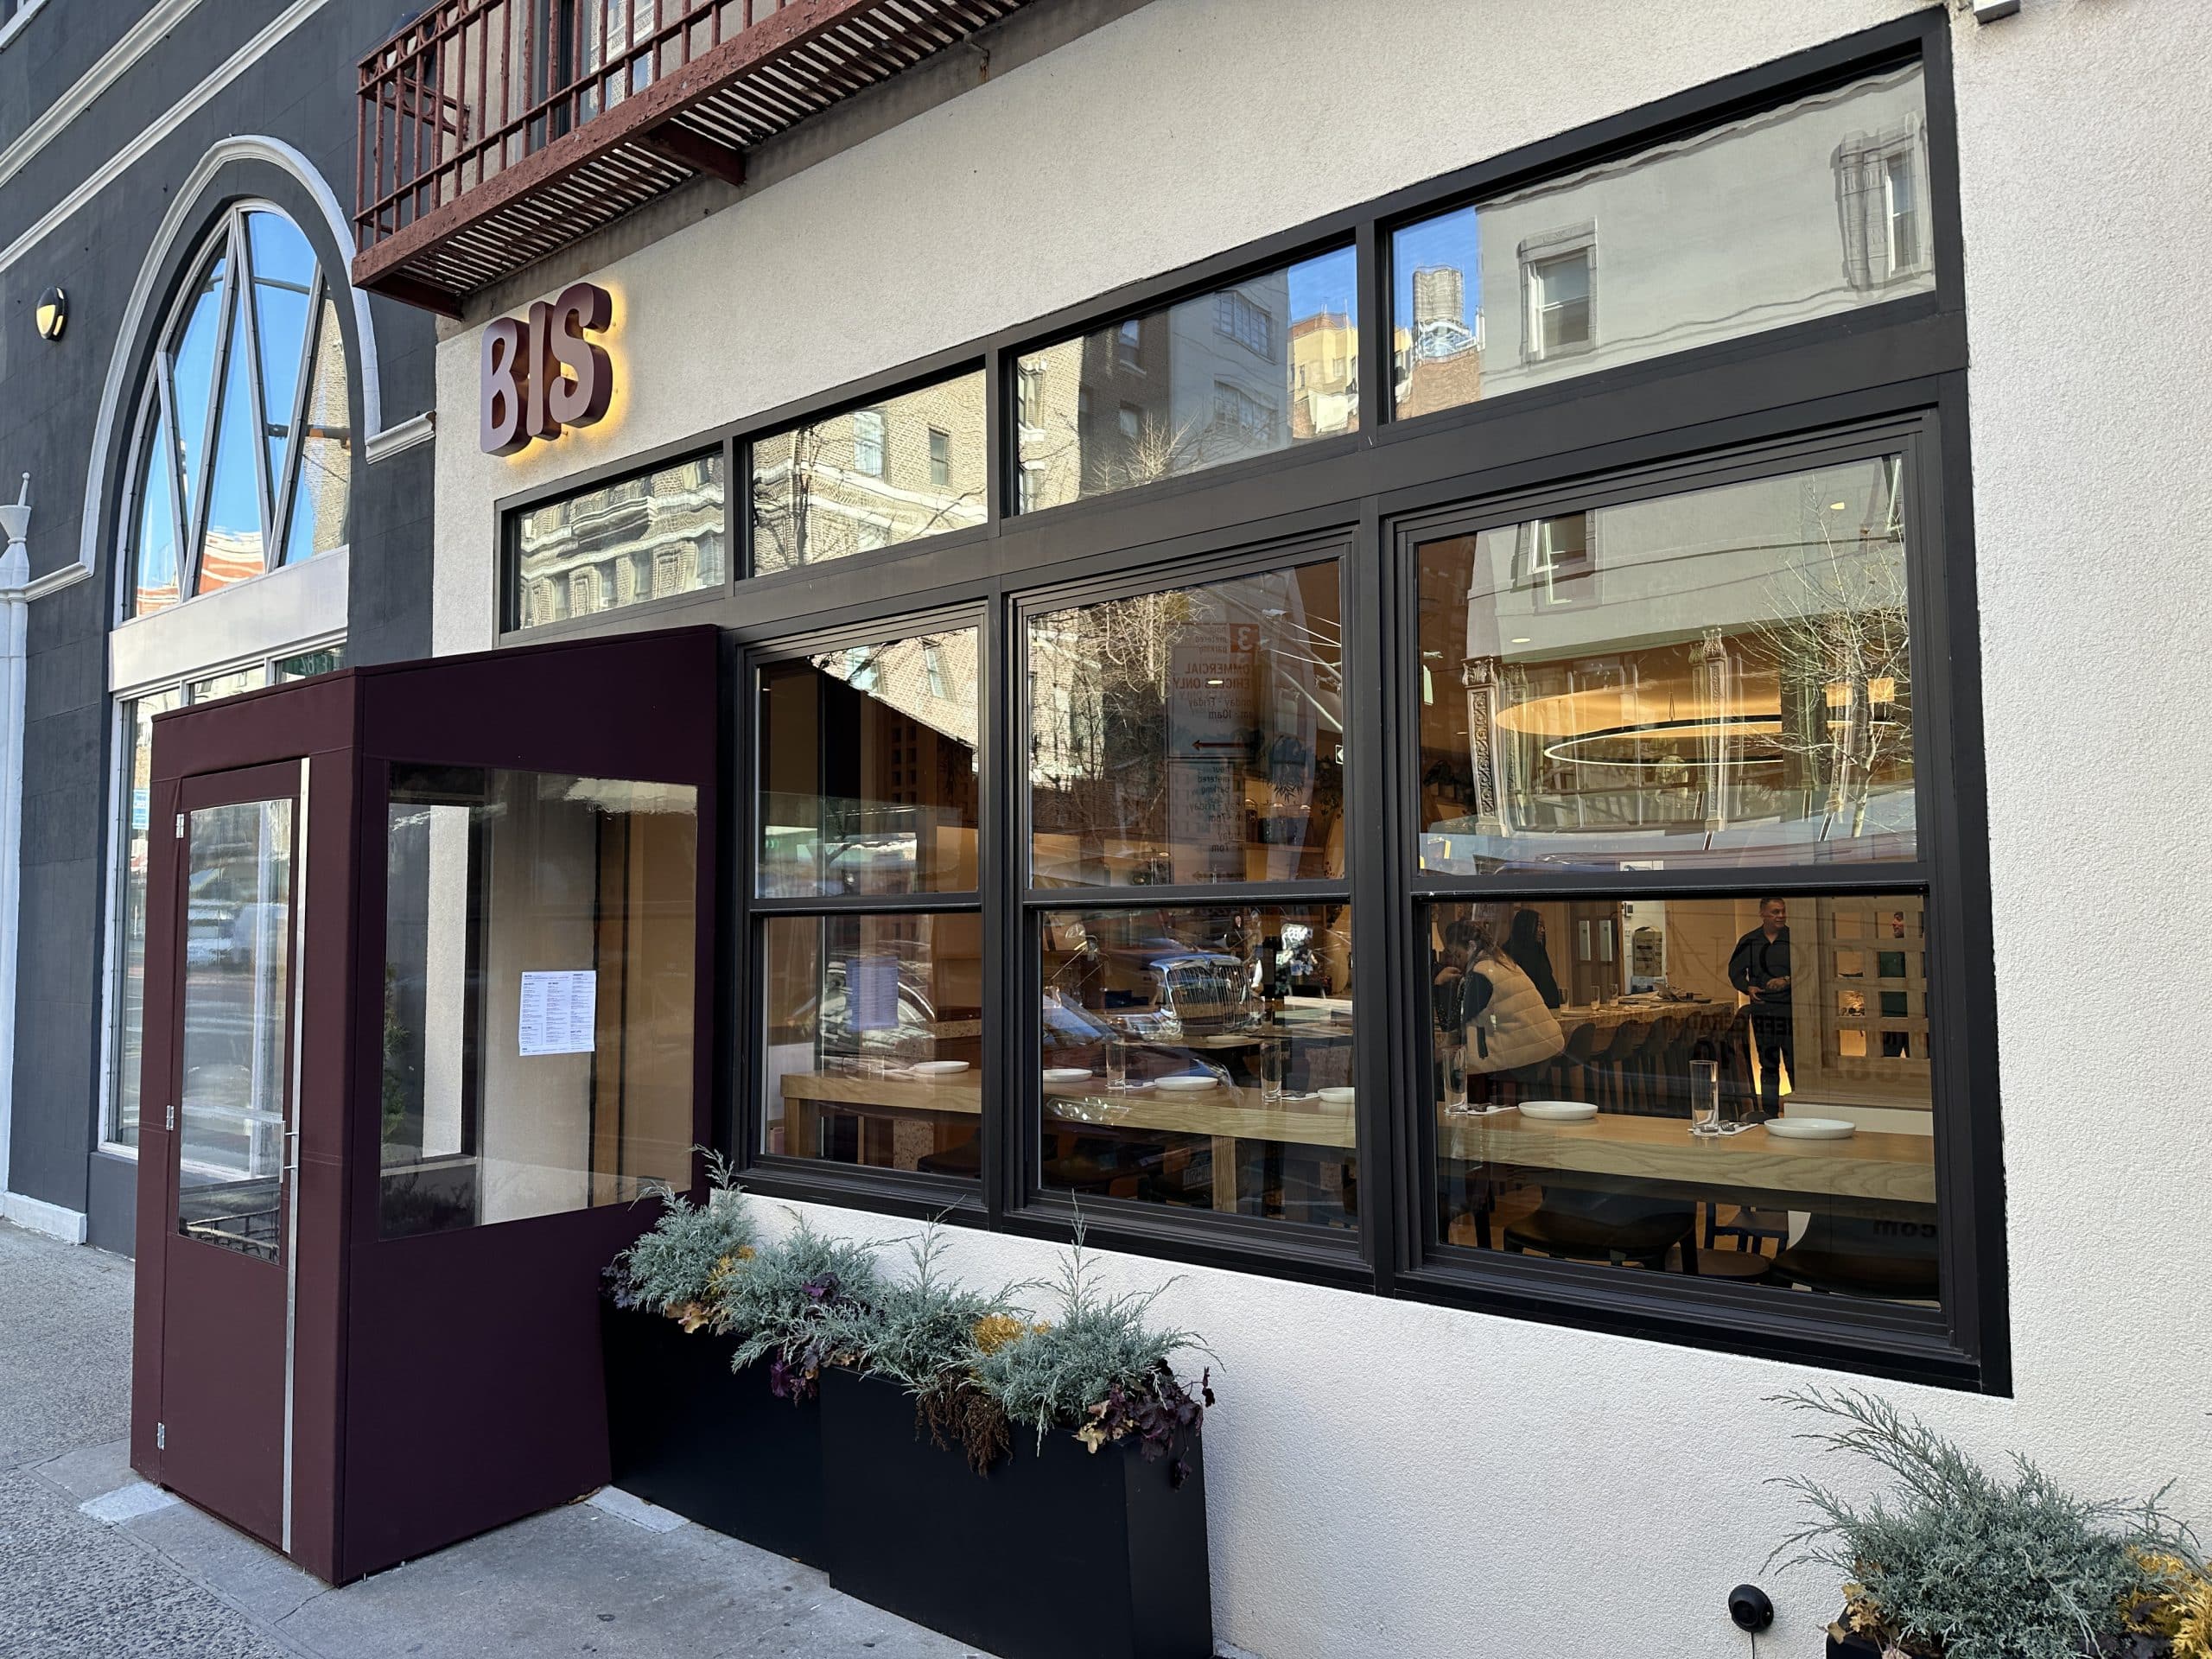 BIS is a brand new Kosher restaurant on the Upper East Side | Upper East Site